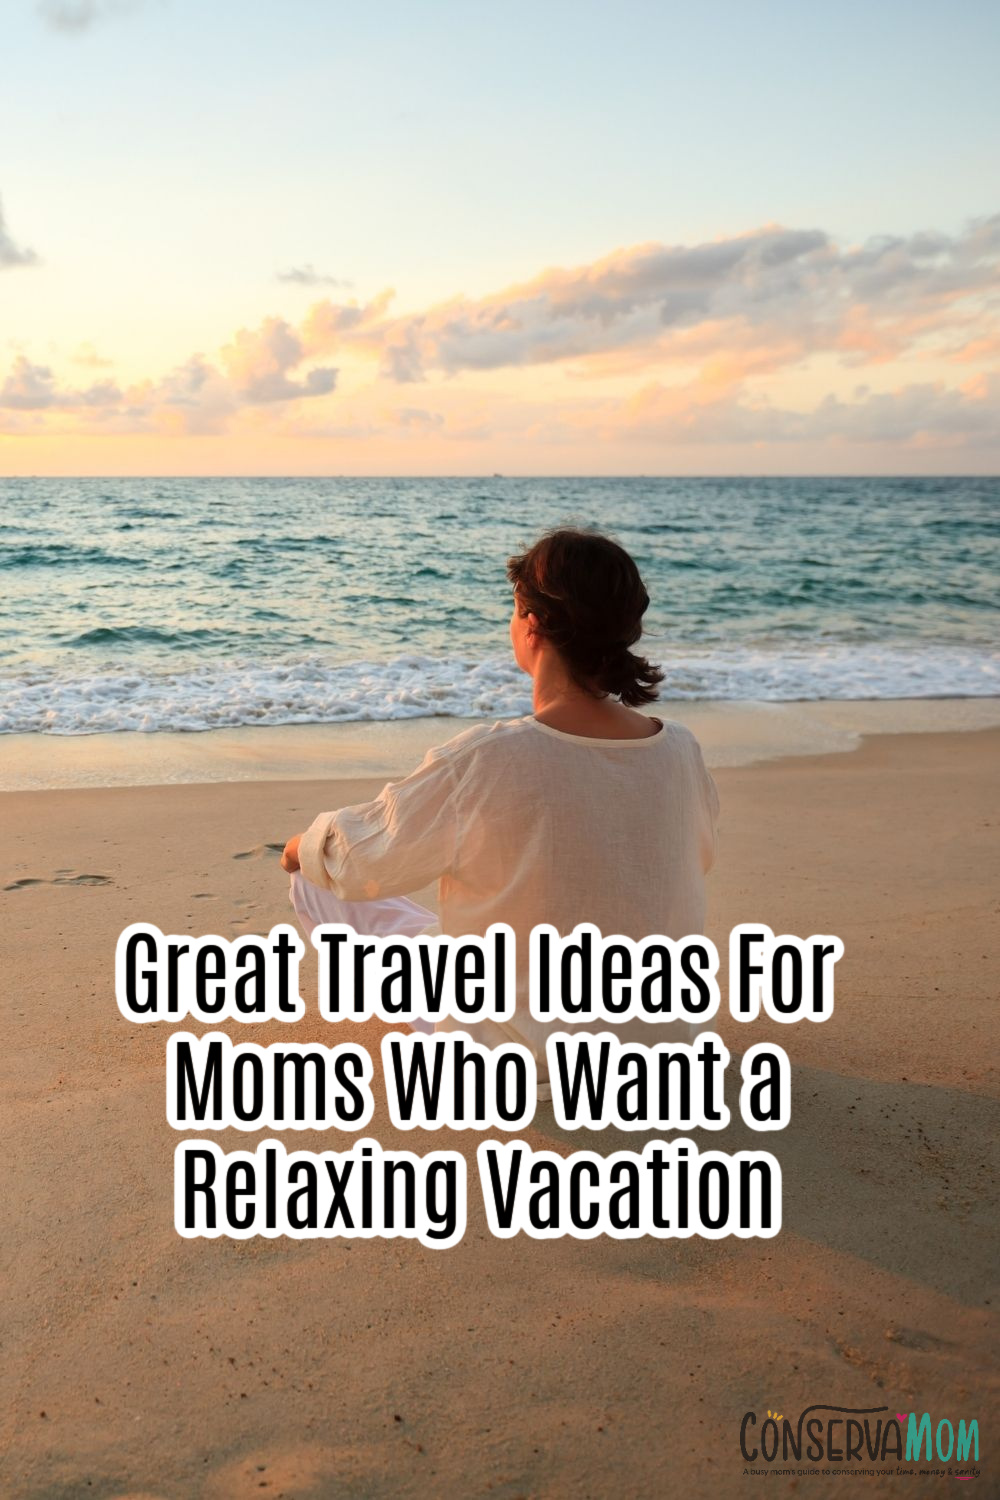 Great Travel Ideas For Moms Who Want a Relaxing Vacation (3)